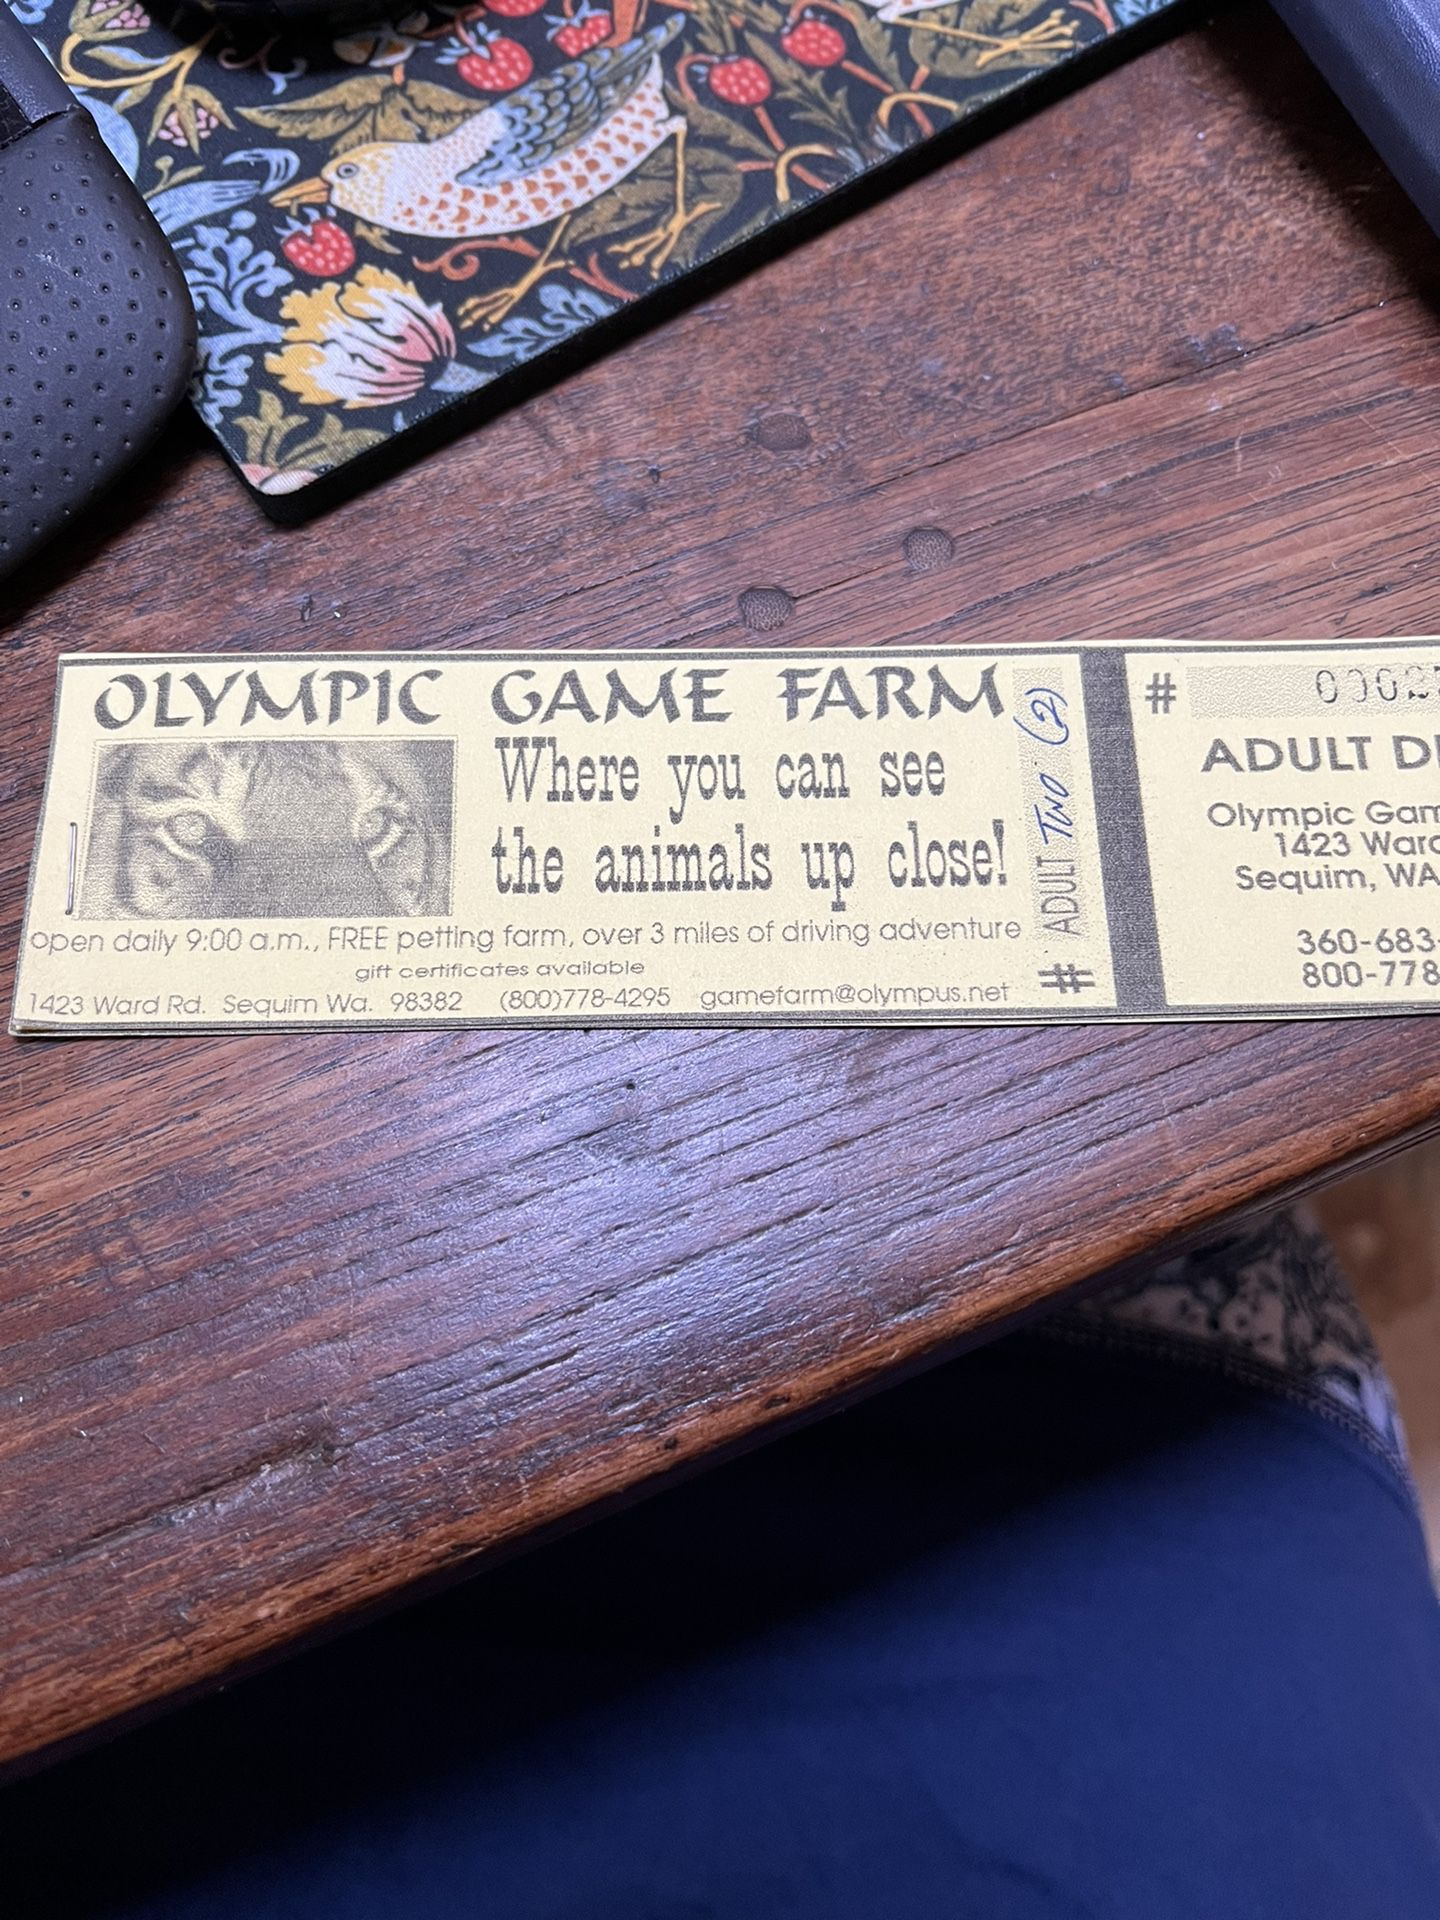 Olympic game Farm tickets